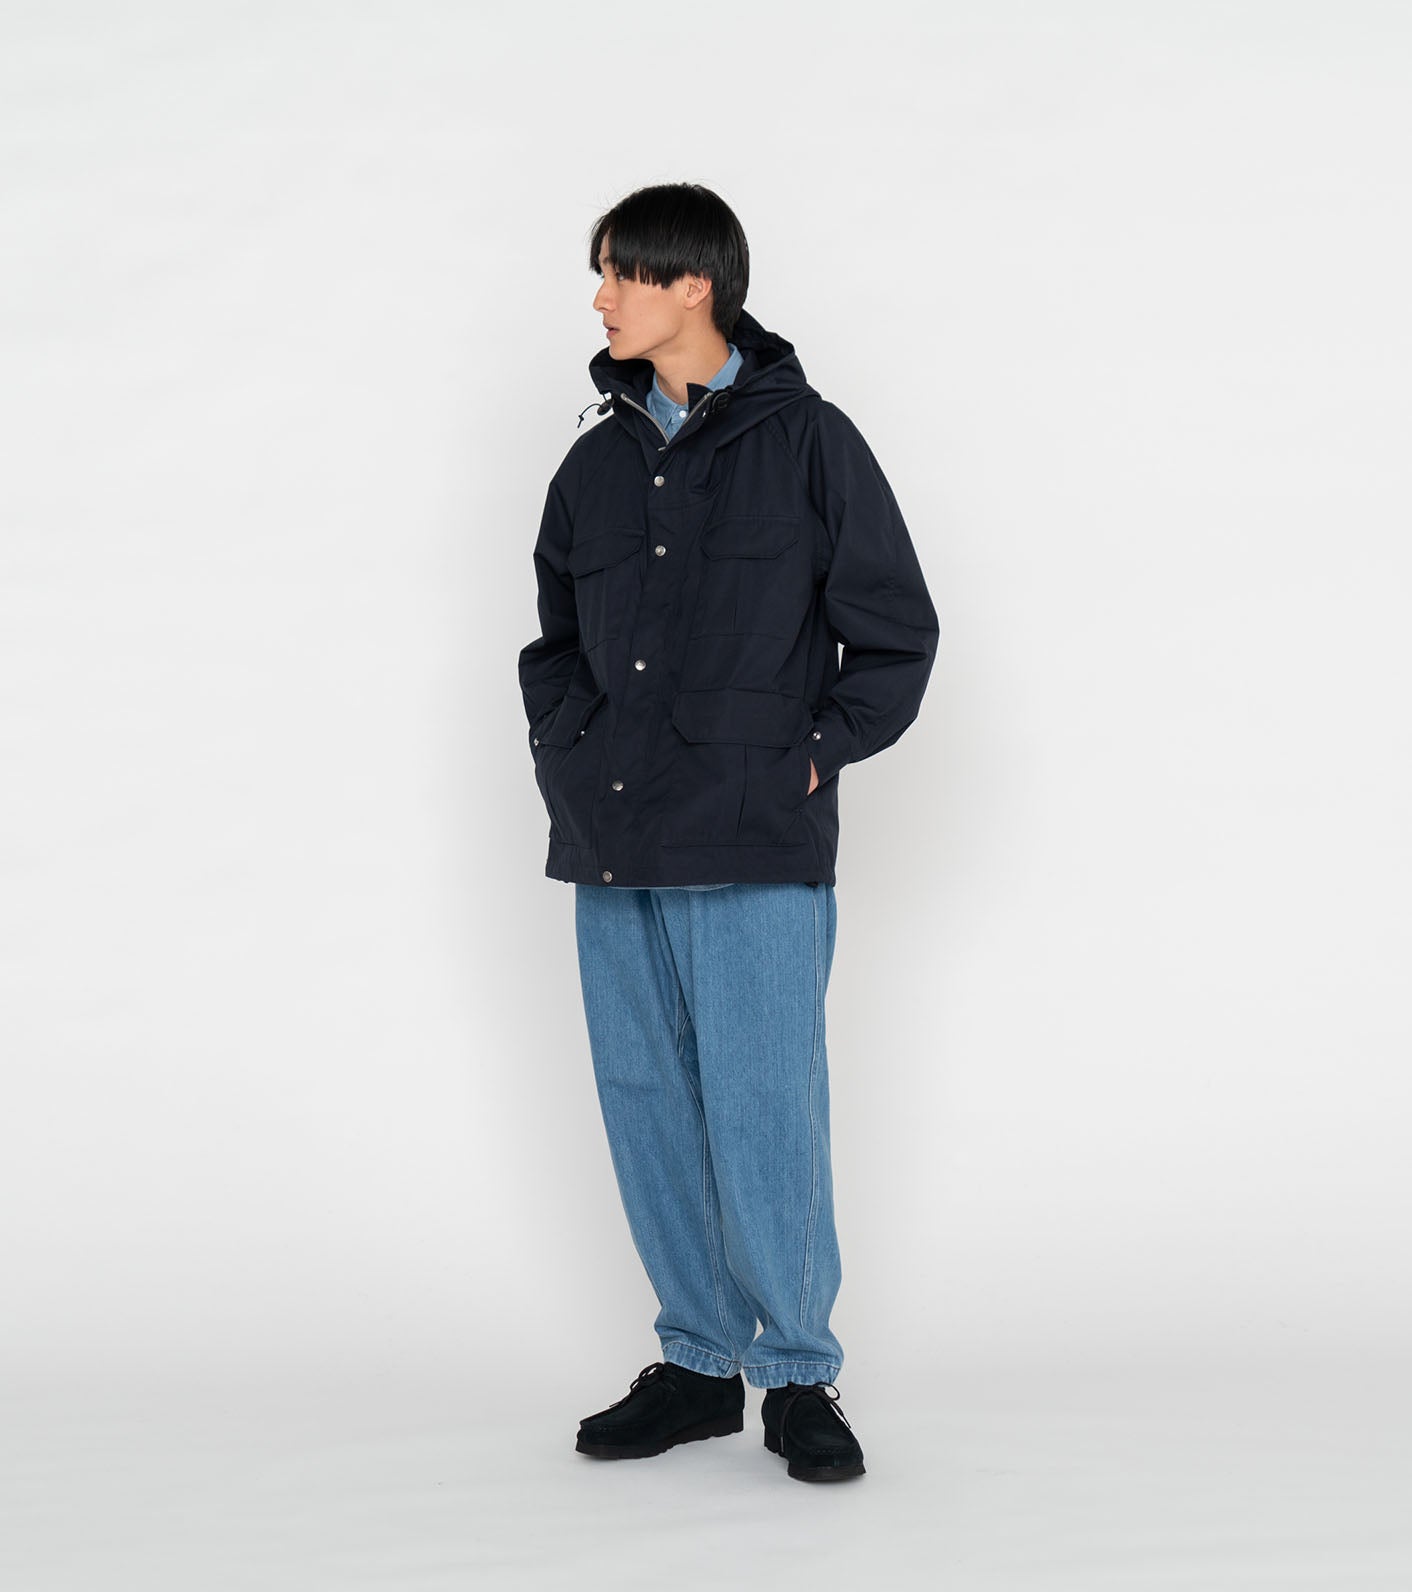 THE NORTH FACE PURPLE LABEL 65/35 Mountain Parka